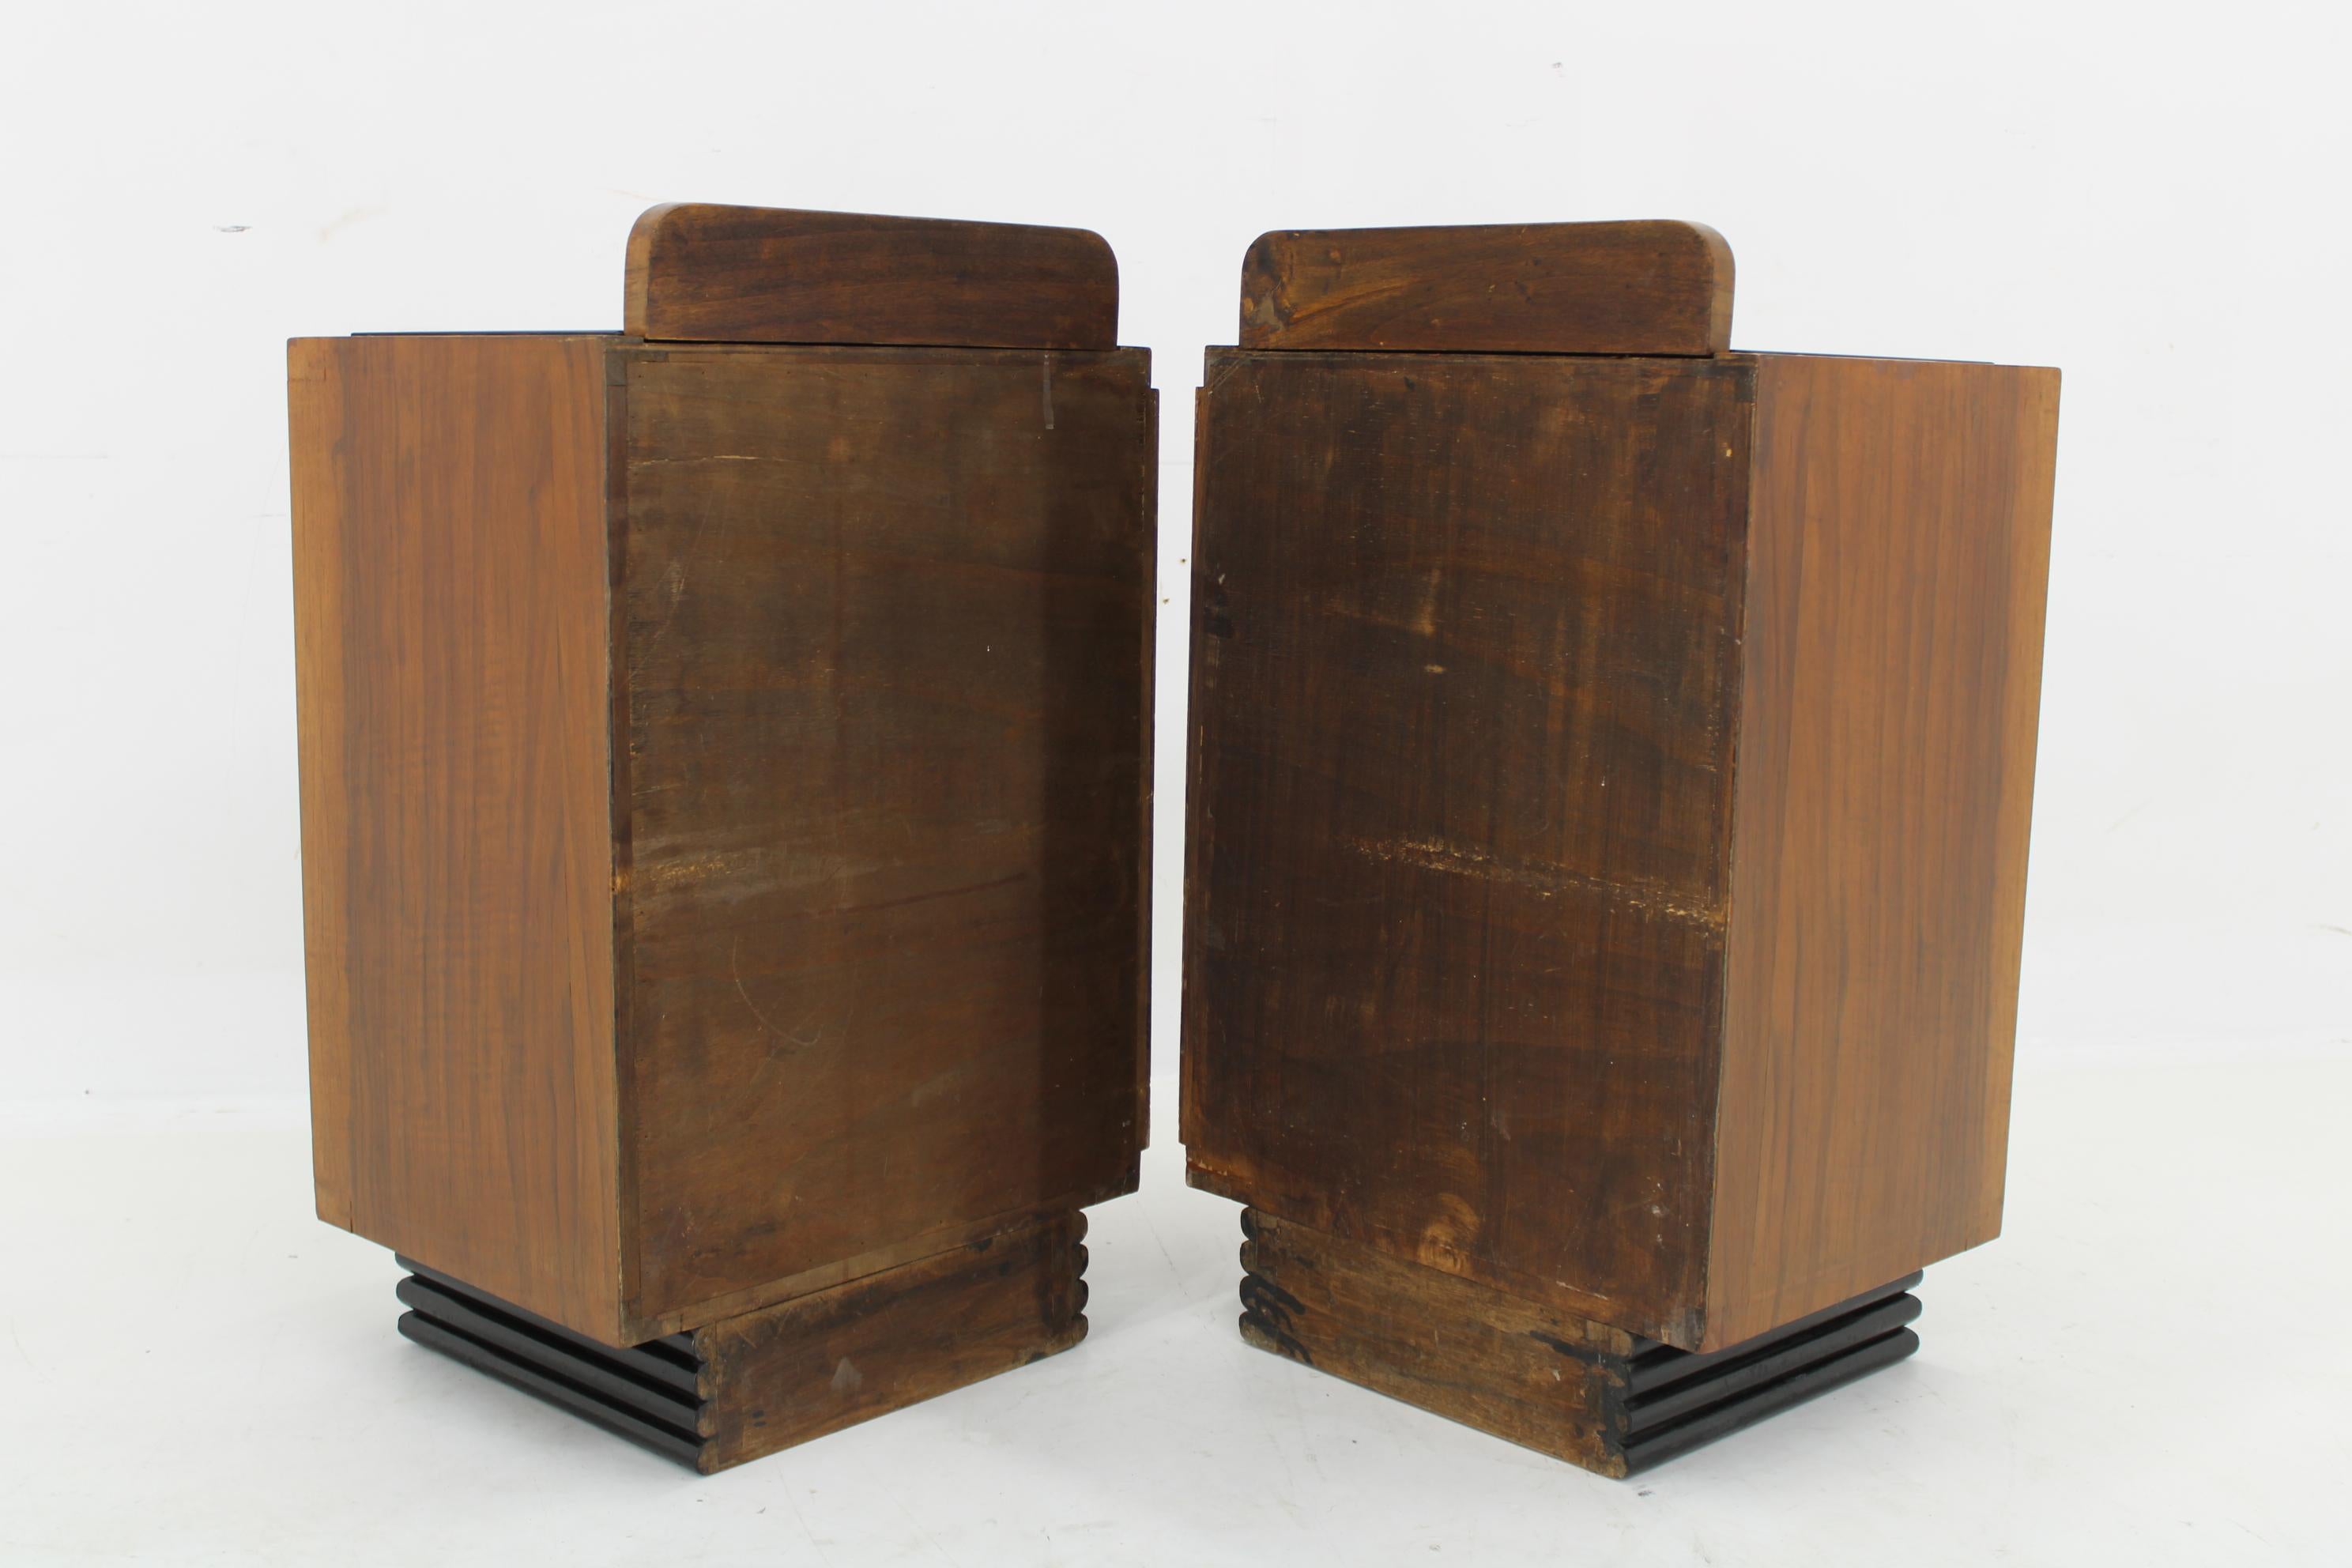 1940s Pair of Art Deco Nightstands in Walnut Finish, Italy For Sale 3